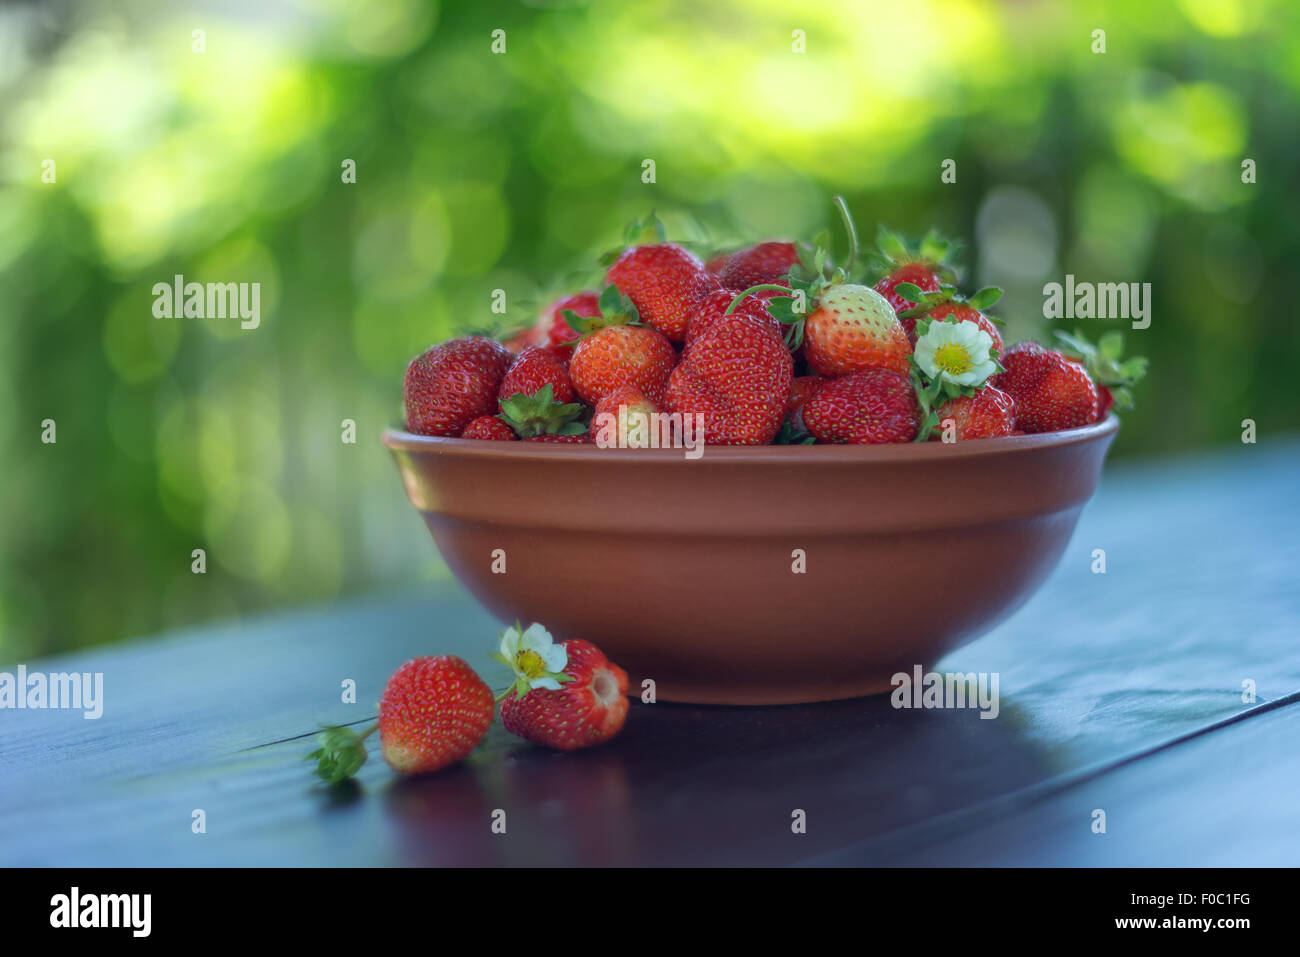 strawberry in plate close up Stock Photo